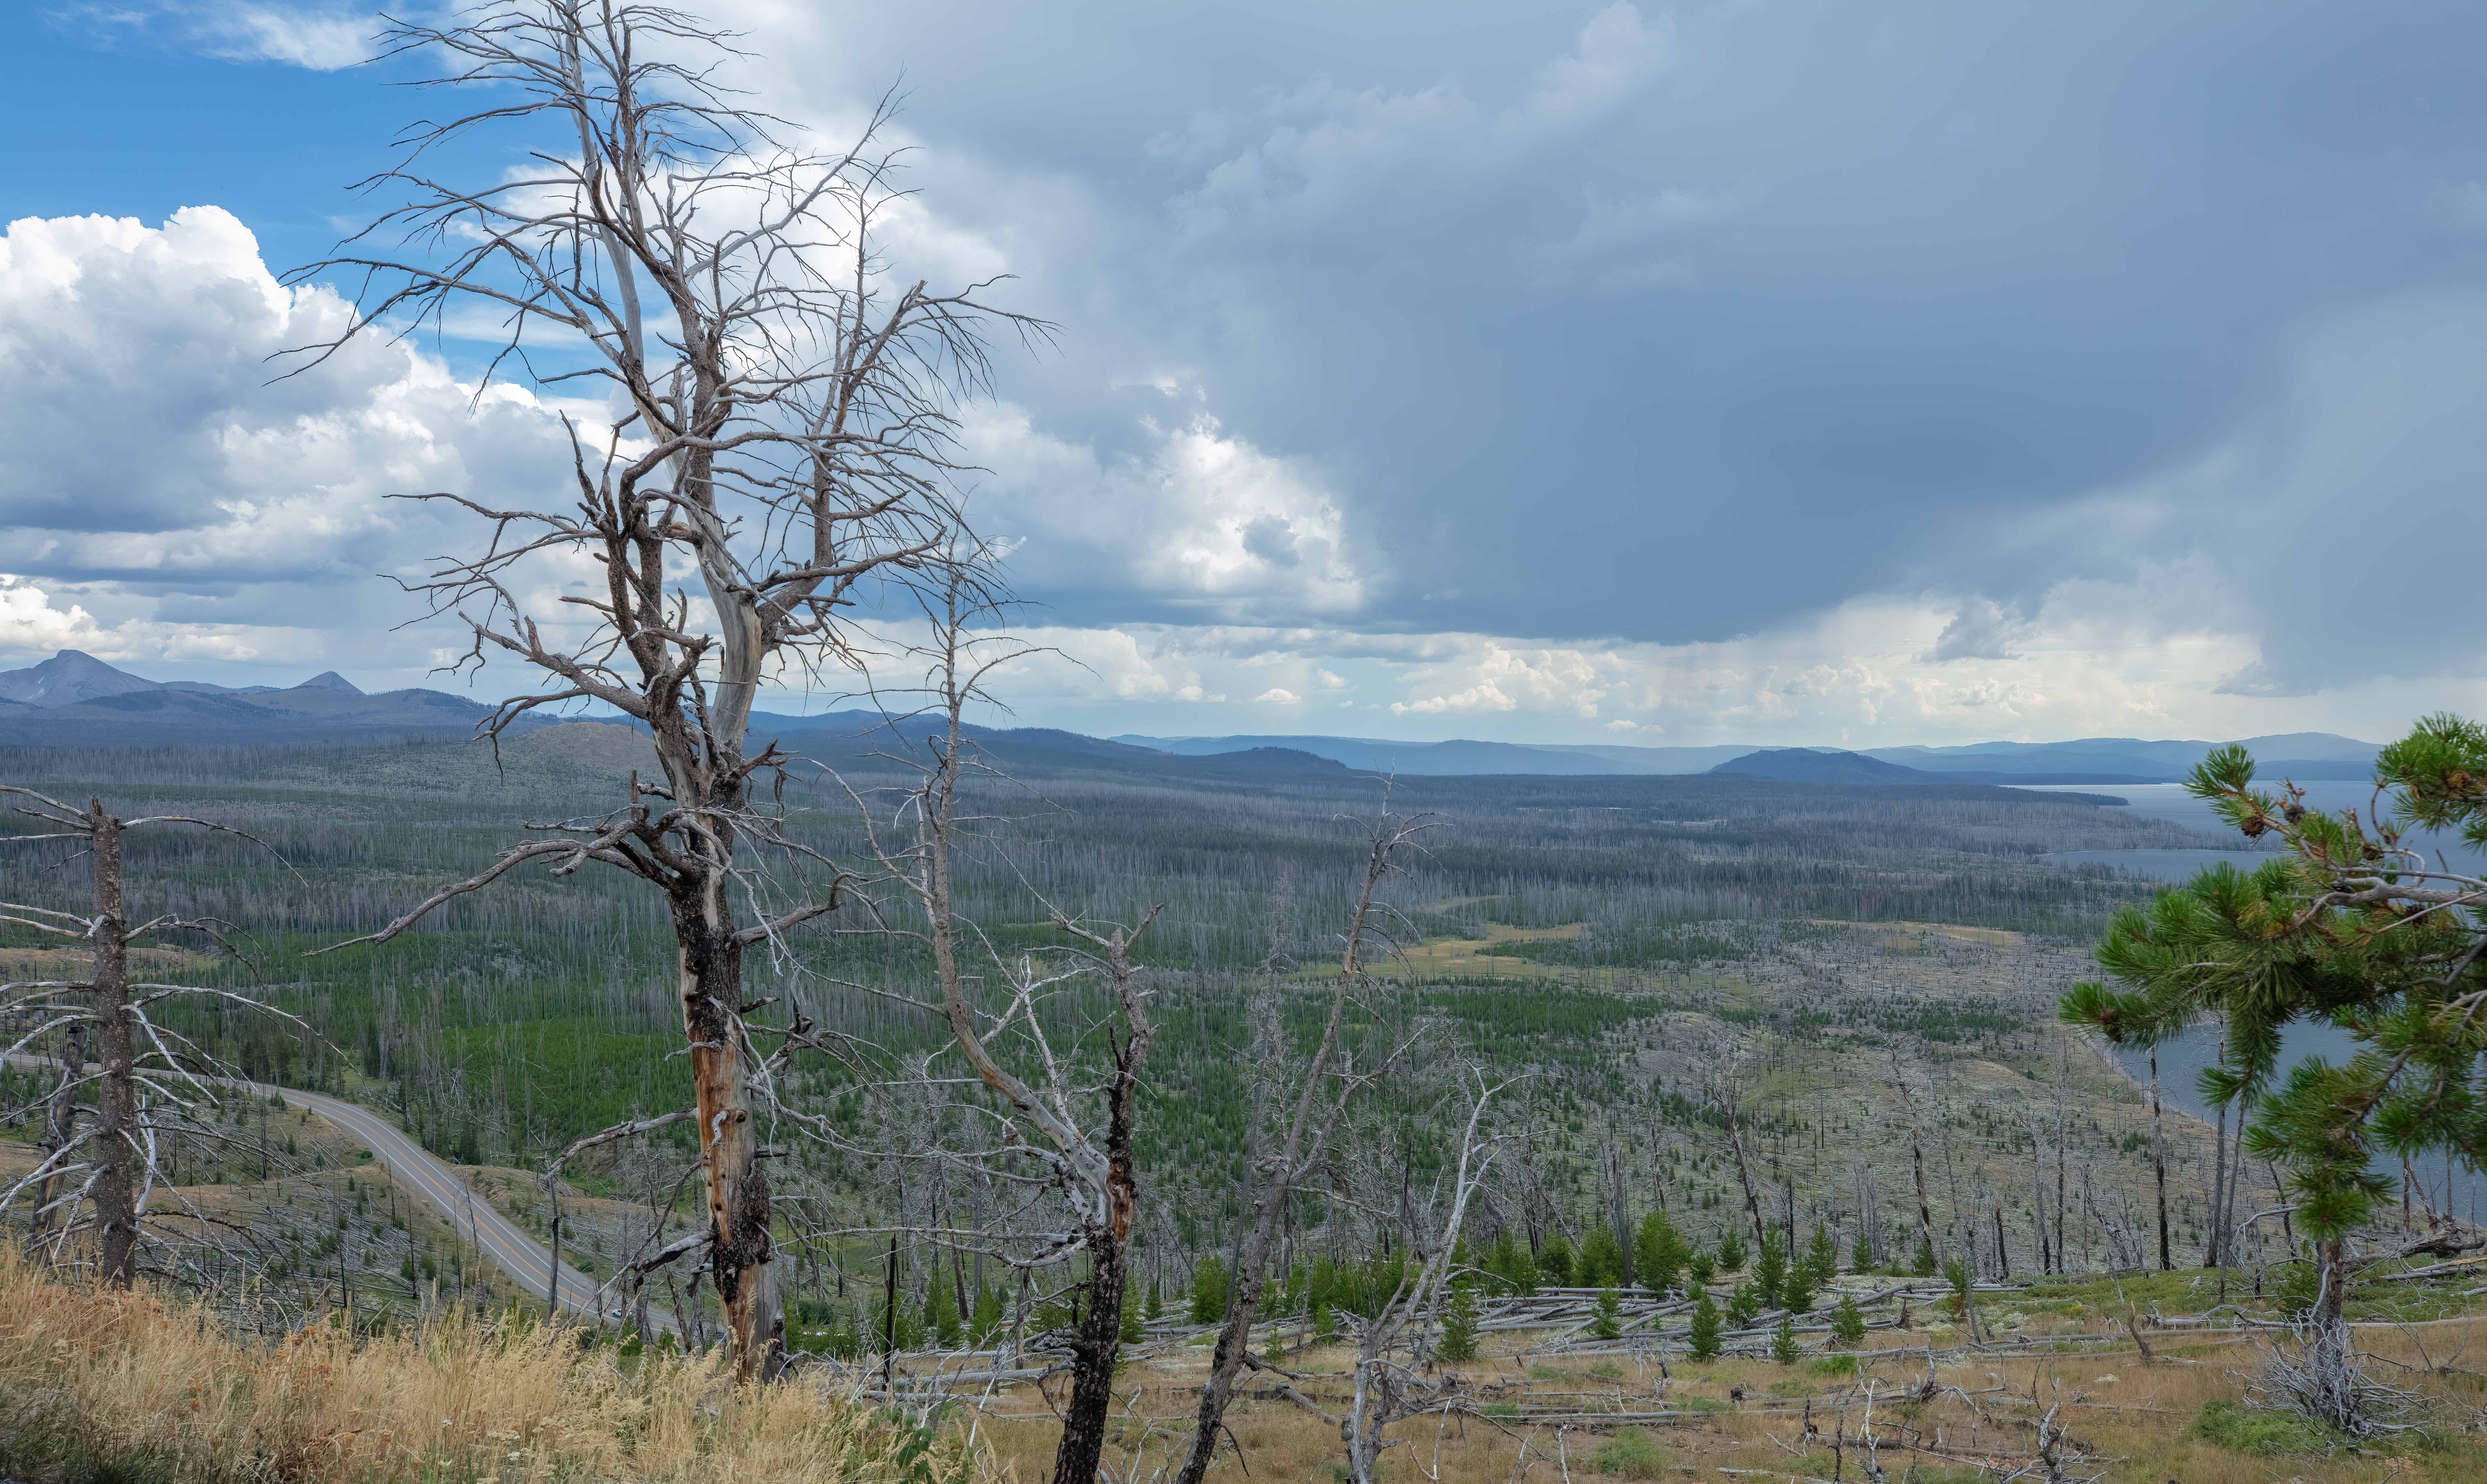 Scenic overlook in Yellowstone National Park